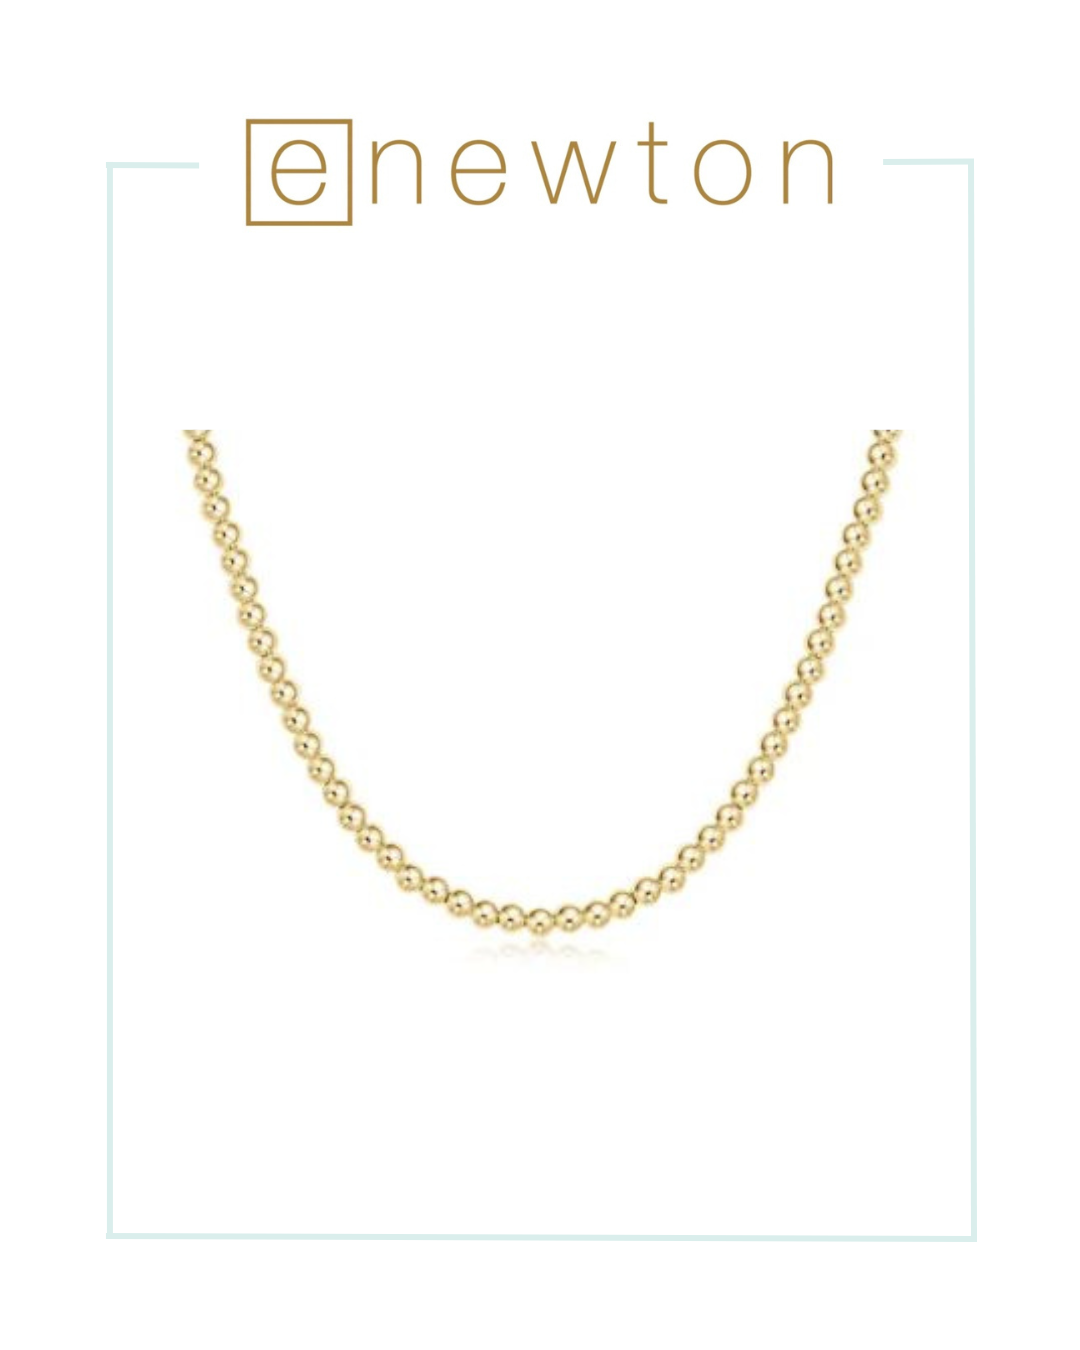 E Newton 15" Choker Classic Gold - 4mm-Necklaces-ENEWTON-The Village Shoppe, Women’s Fashion Boutique, Shop Online and In Store - Located in Muscle Shoals, AL.